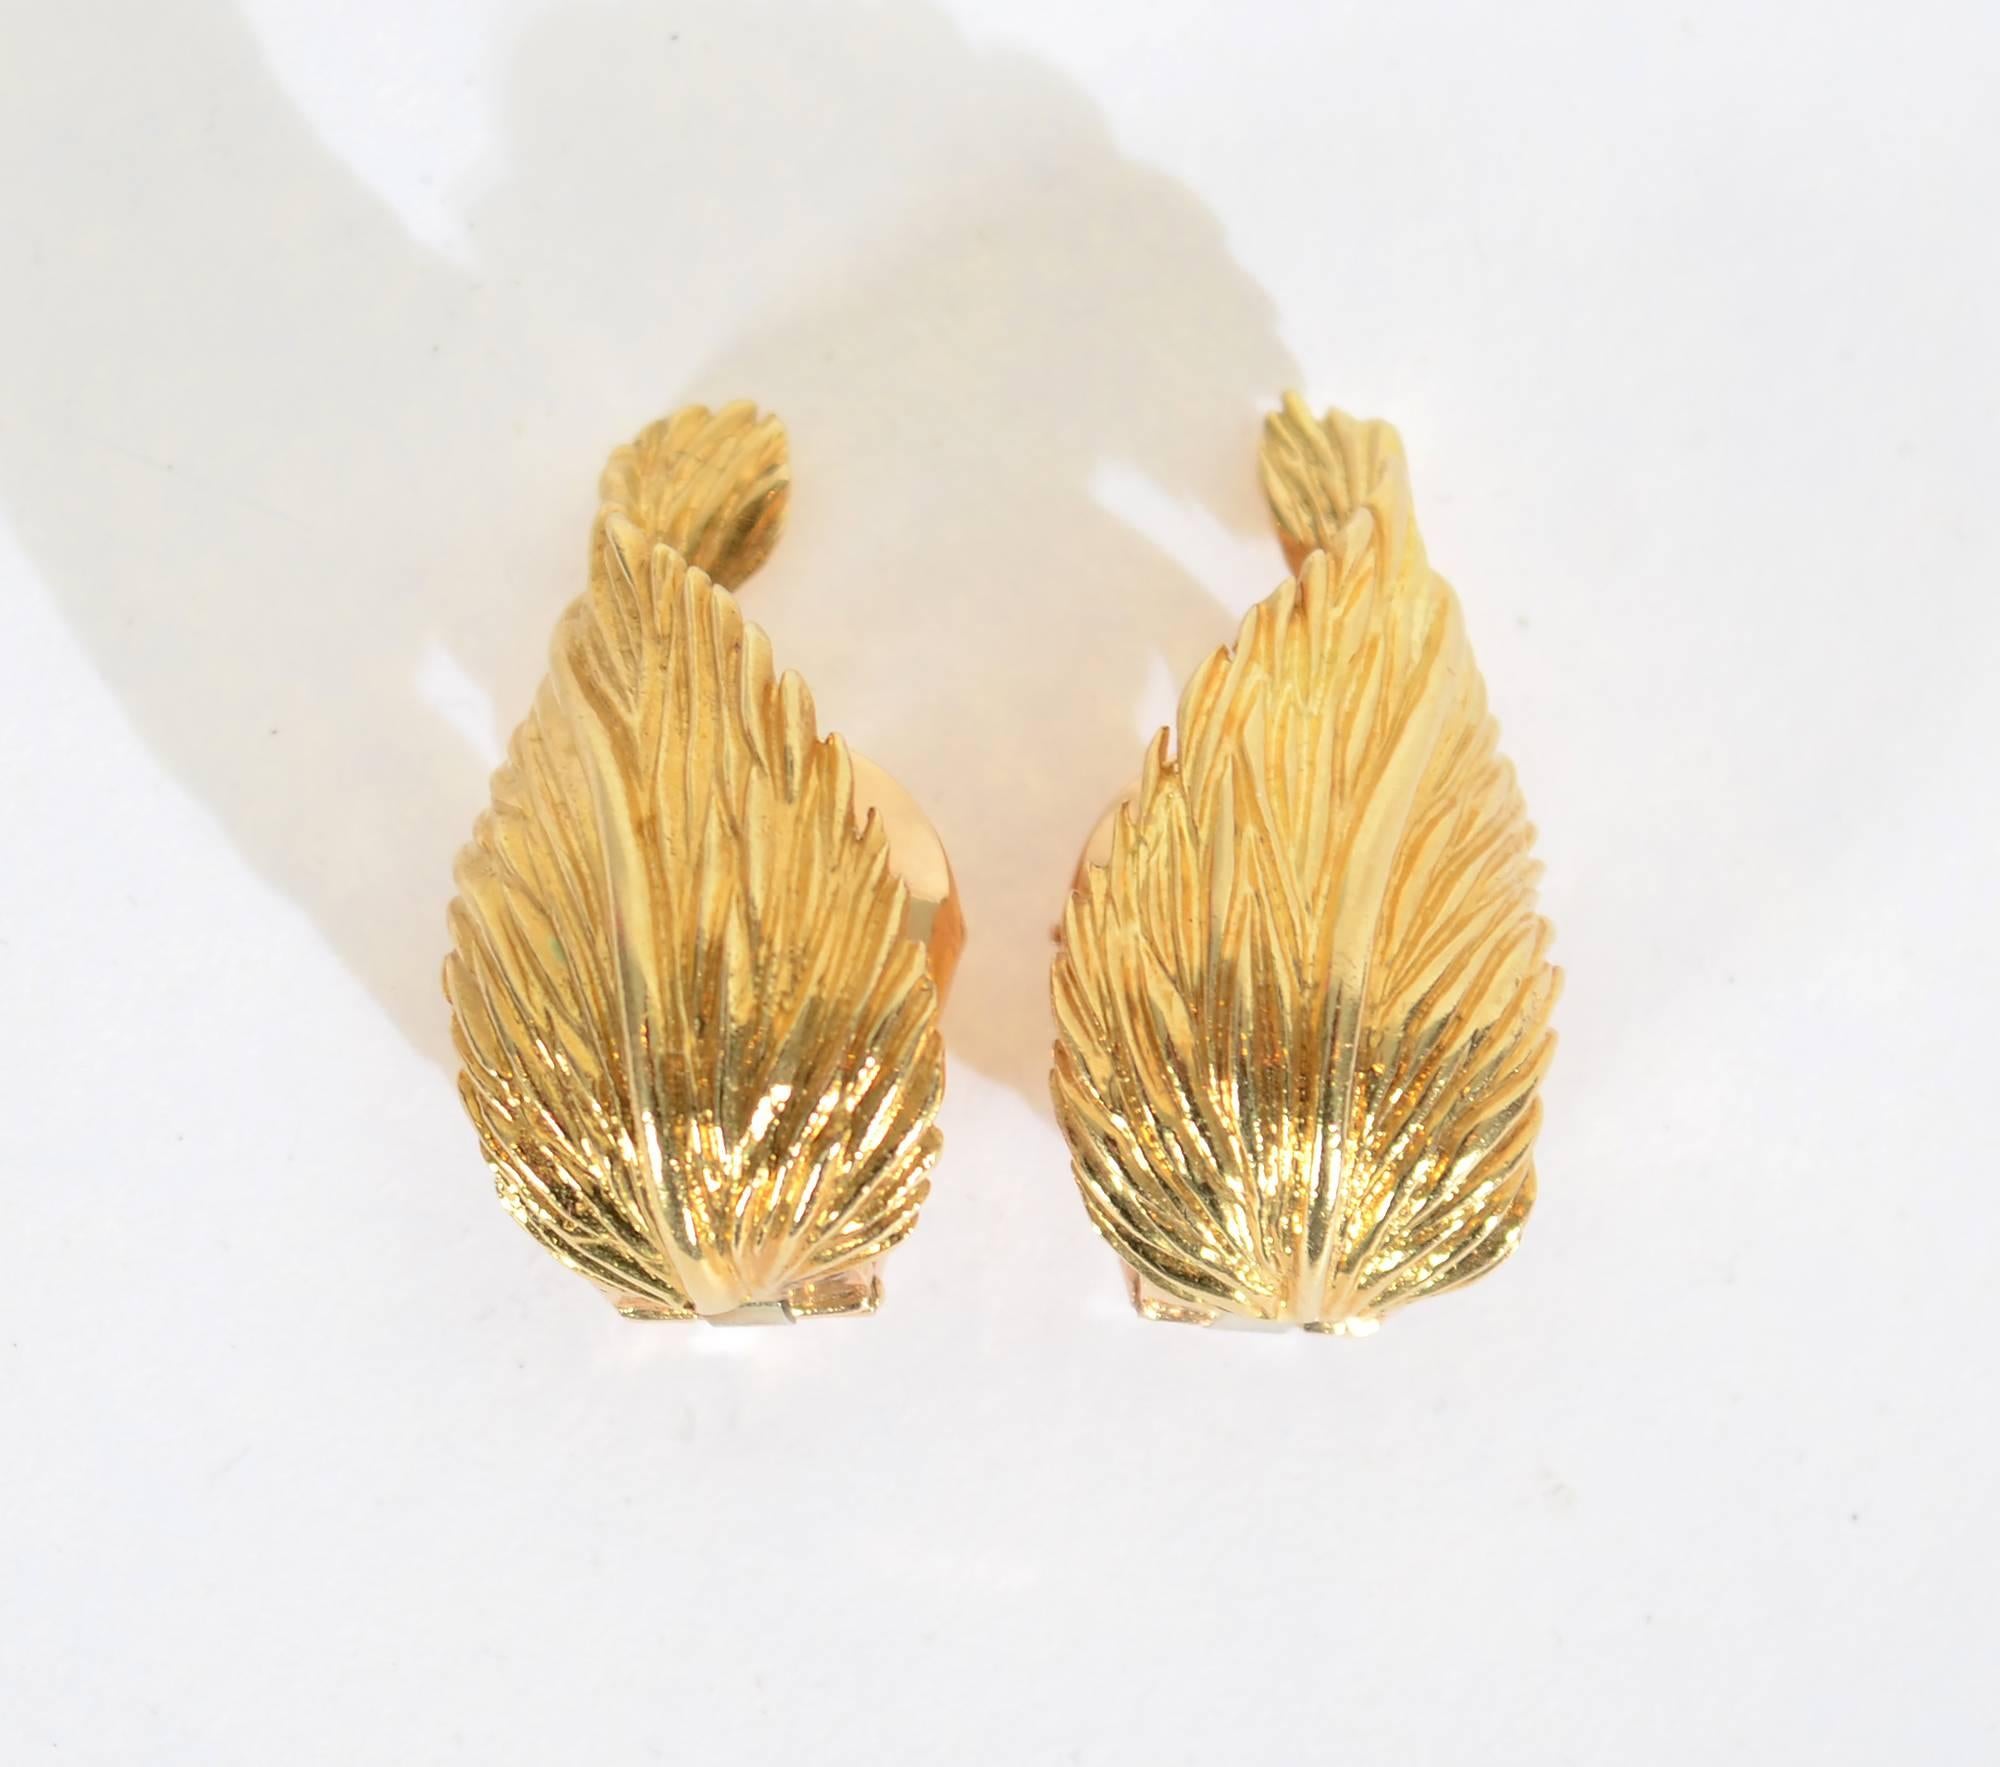 Graceful 18 karat gold earrings by Van Cleef and Arpels in the form of an undulating leaf. They are nicely textured. Measurements are 1 inch in length and 9/16" at the widest. Clip backs can be converted to posts.